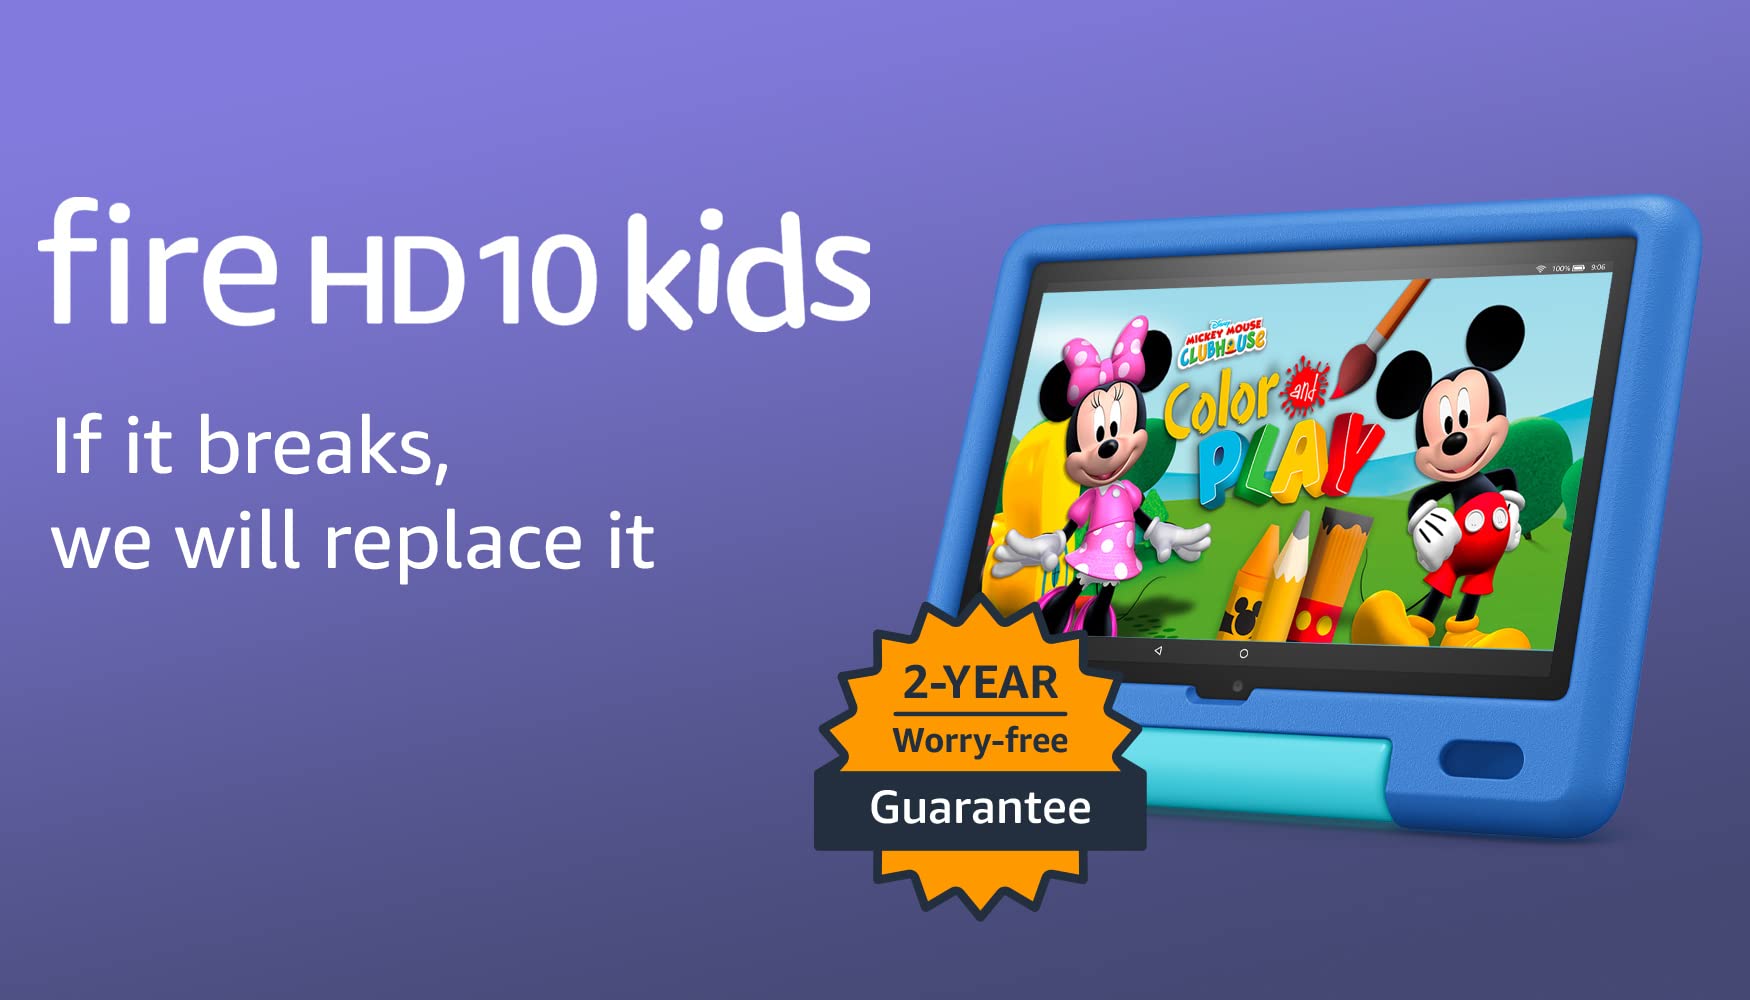 Amazon Fire HD 10 Kids tablet - ages 3-7 (2021). 32GB, 2-year worry-free guarantee, 12-hour battery, ad-free content for kids 3-7, parental controls, 10.1